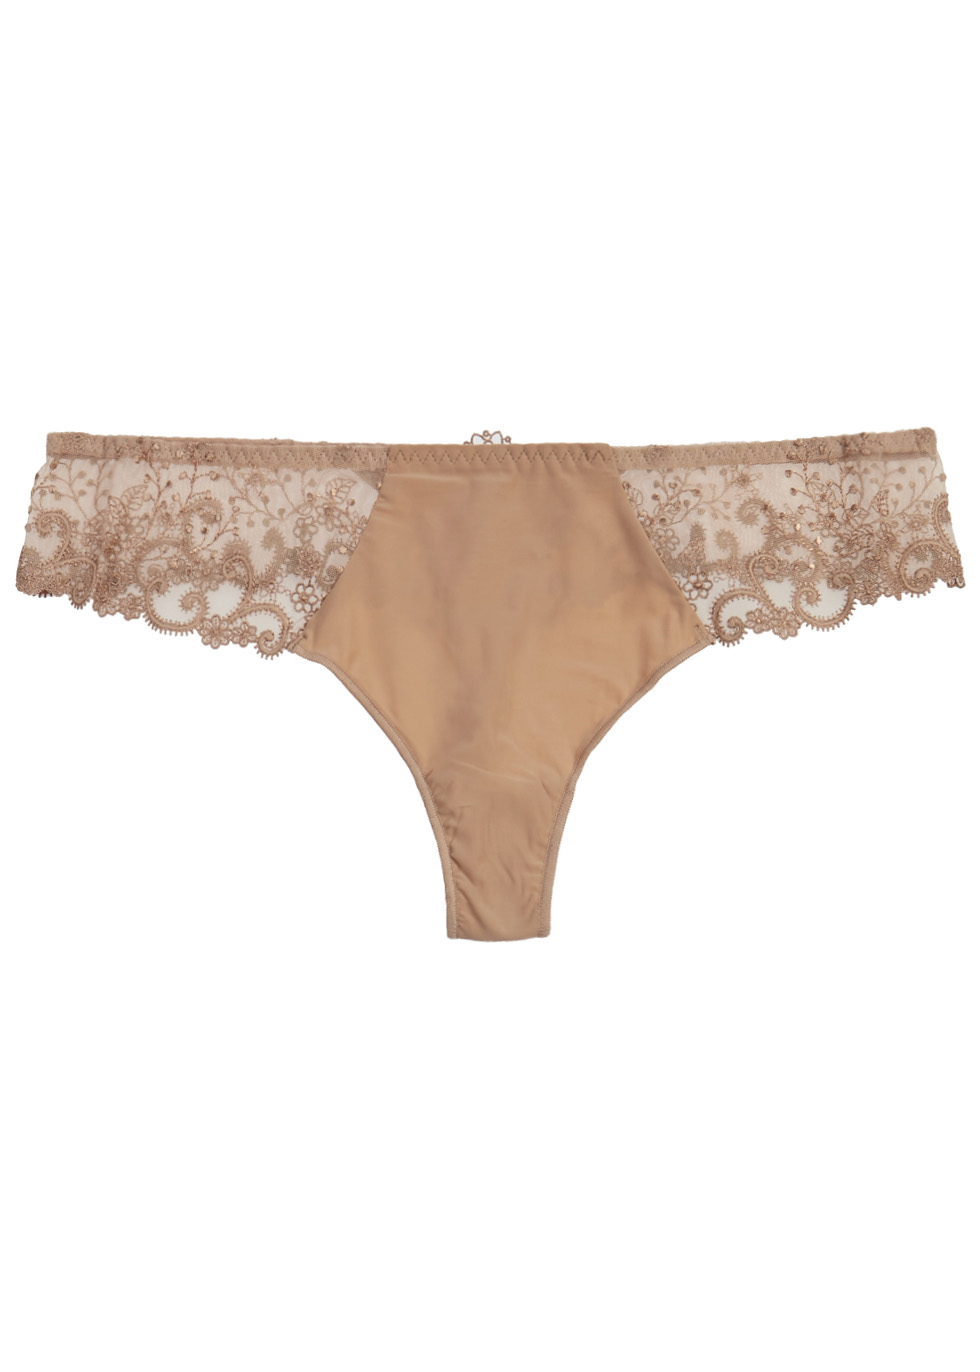 Delice embroidered thong